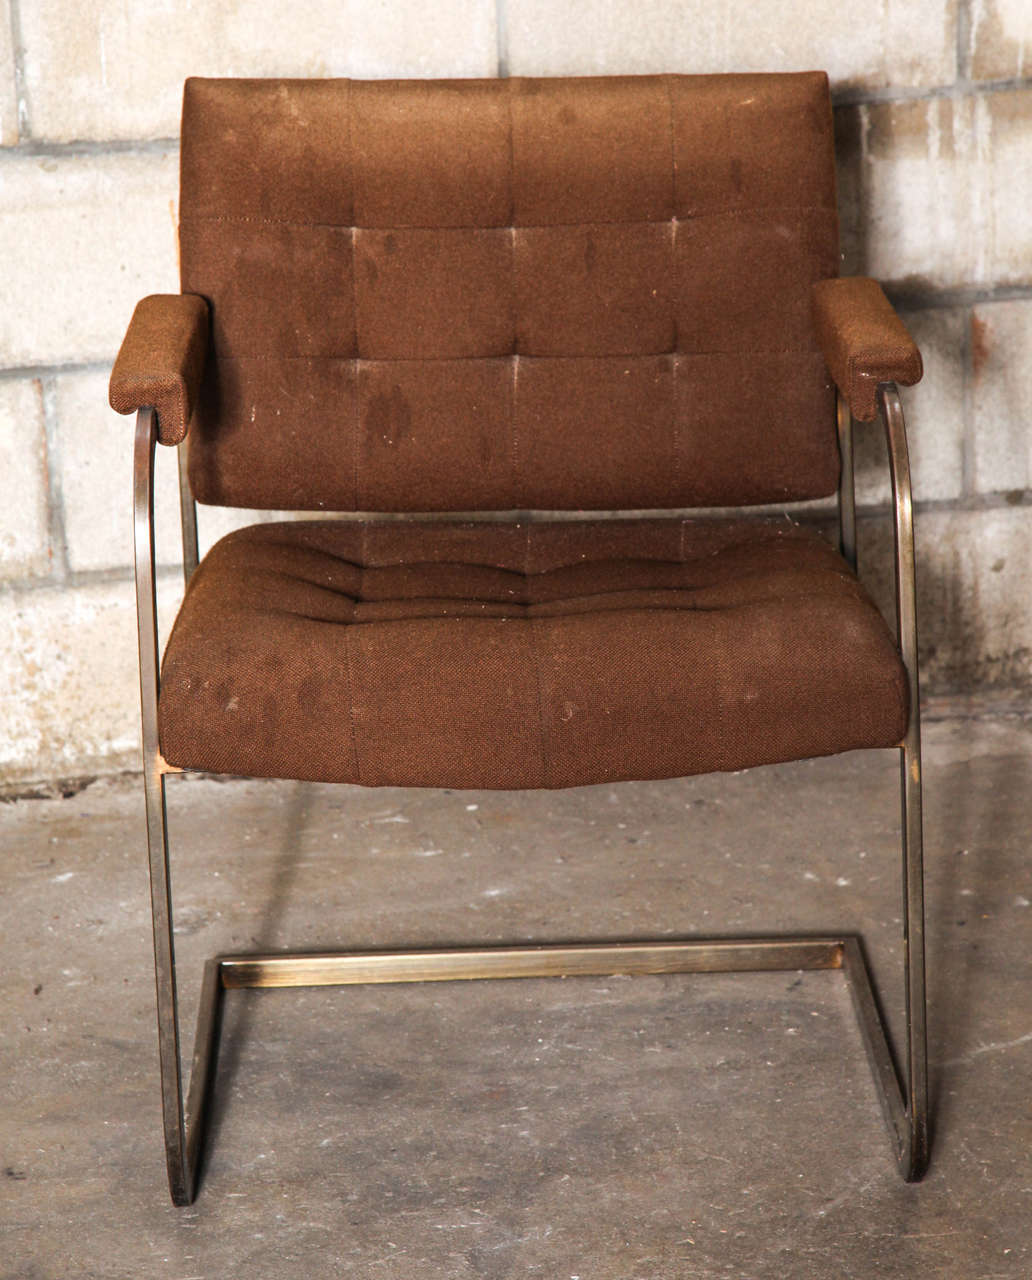 Store closing-- last day is 7/31. Offers welcome! Mid-Century flat bar cantilevered chair in bronze-plated steel. Made by Patrician Furniture Company and signed with tag to underside. Needs new upholstery.